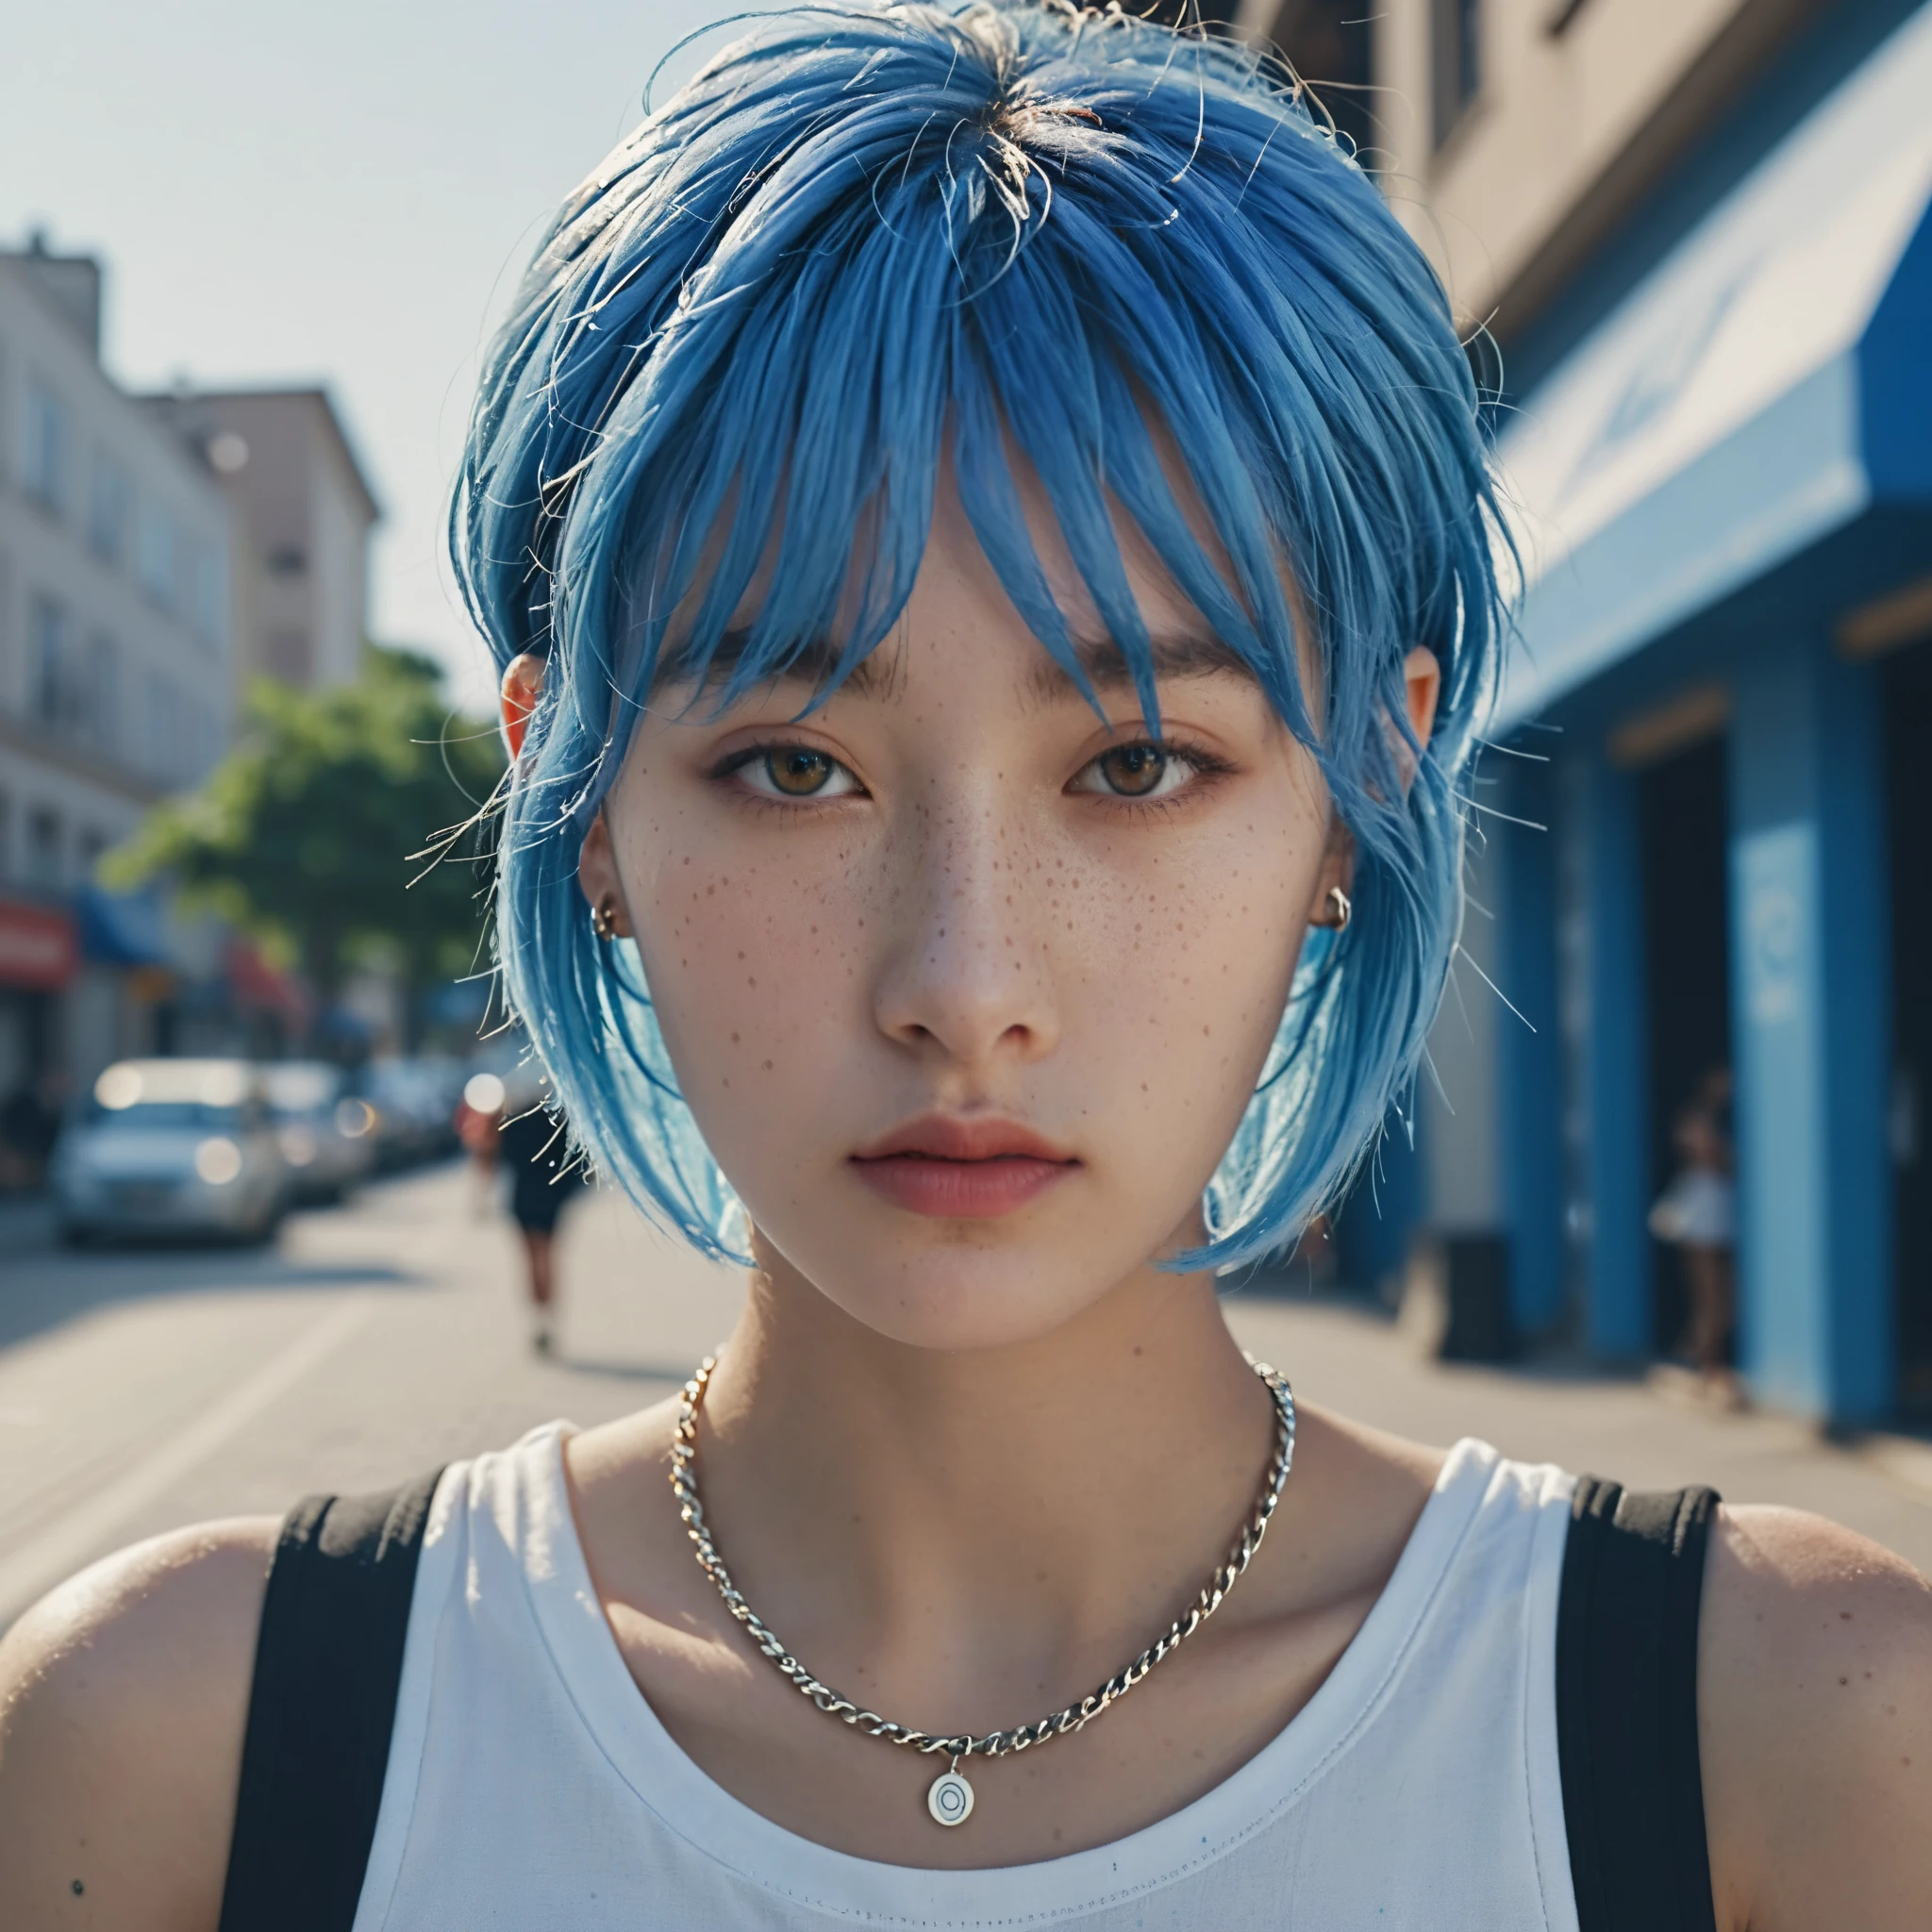 blue shaved hair best anamorphic lens photography 50mm lens close up of freckled woman。In the background, the morning sun shines on her hair.、background is blurry。Hip-hop fashion。fashionable。NIKE sneakers。The whole body is visible。